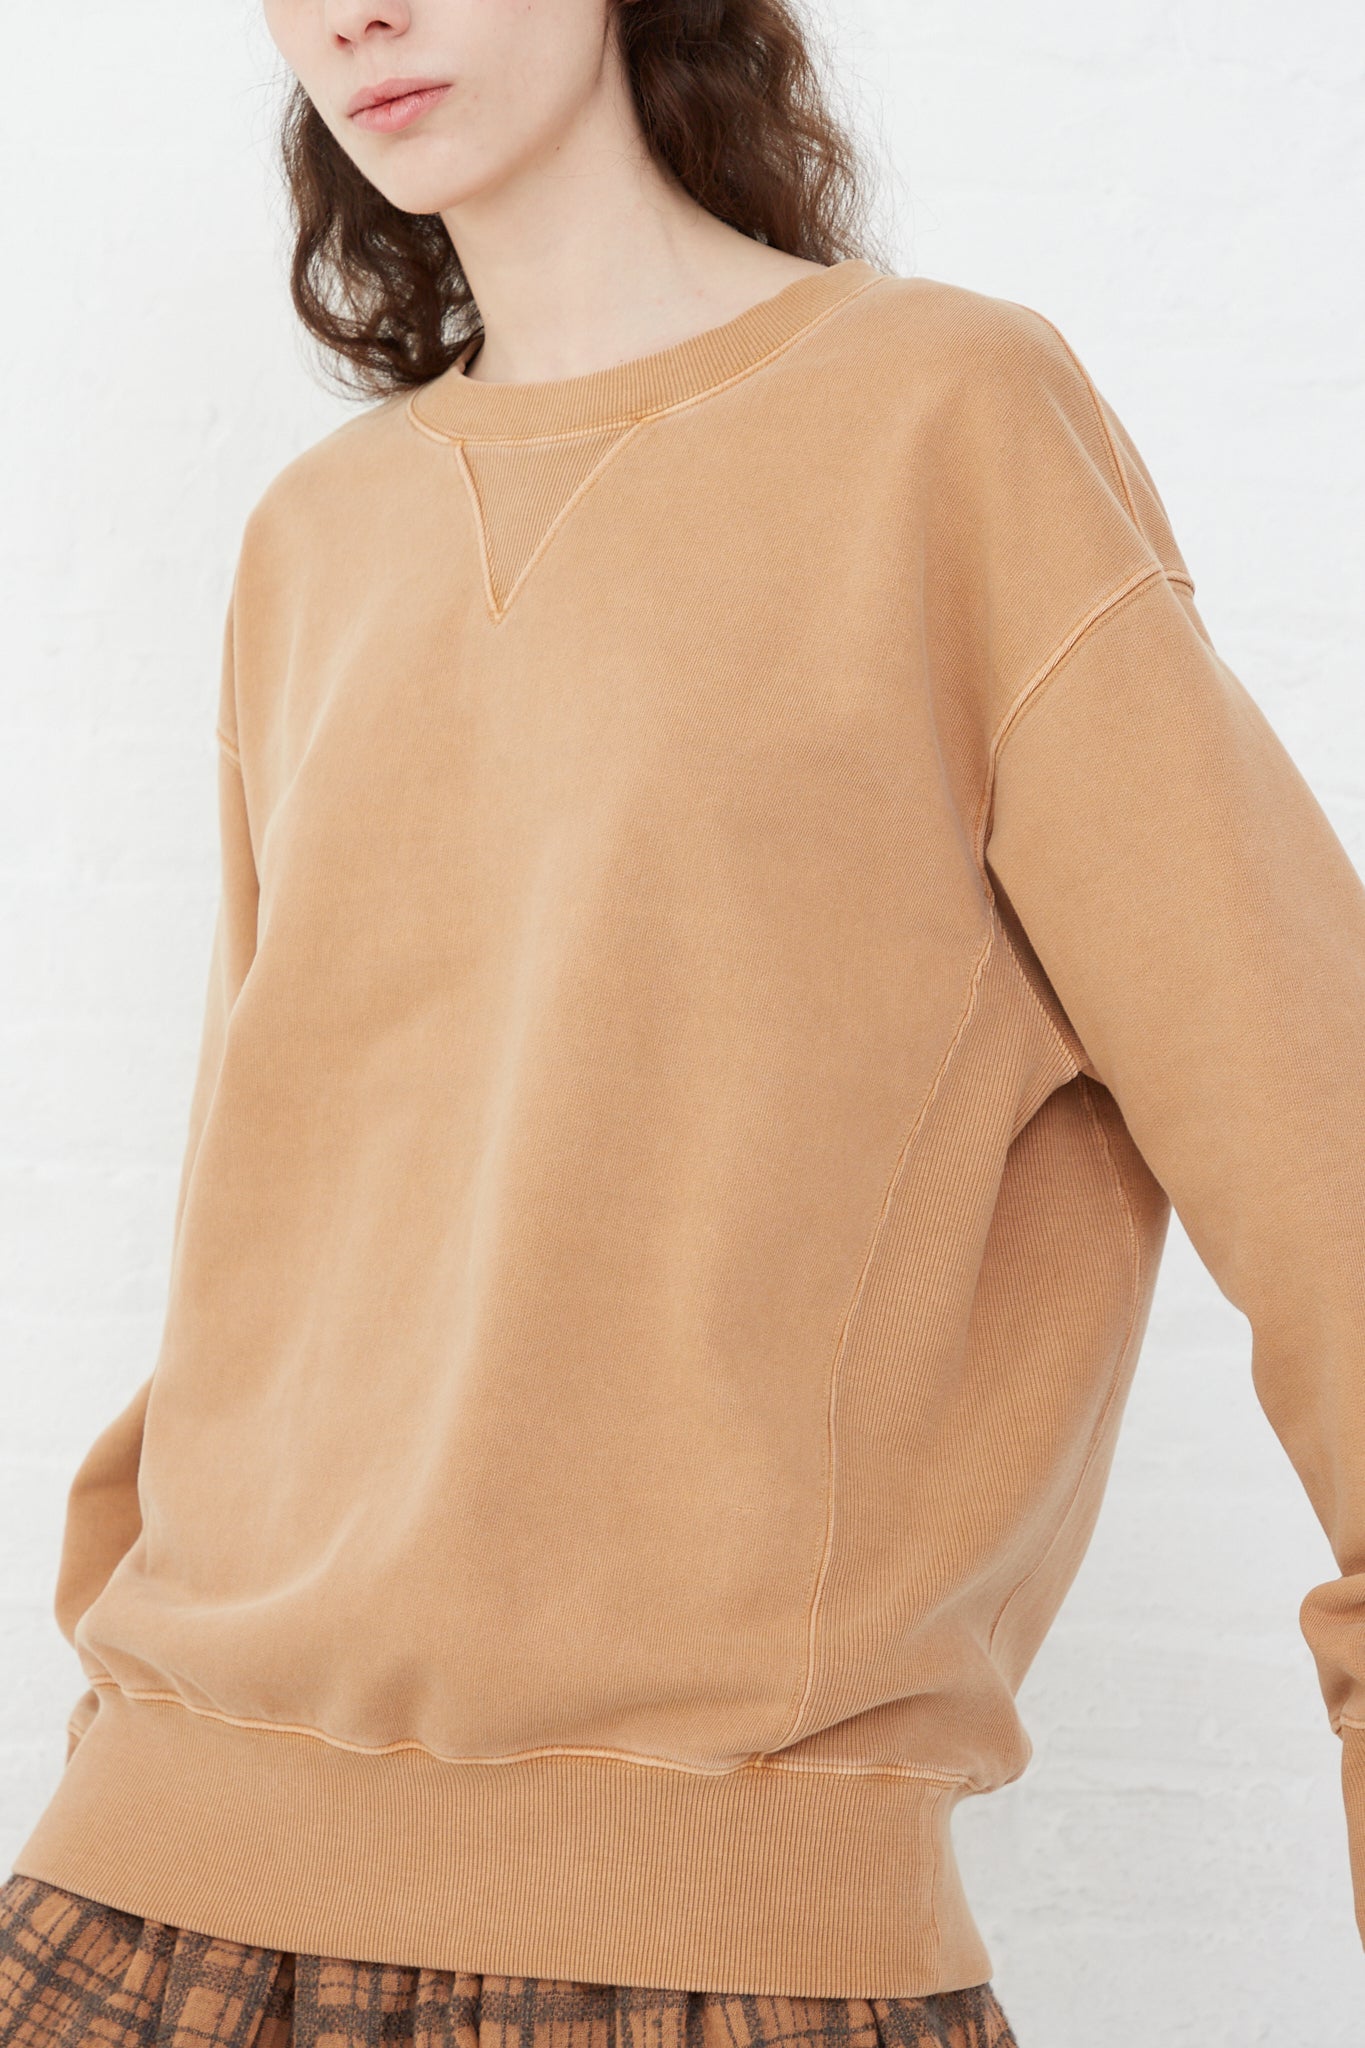 The model is wearing an oversized Ichi Antiquités Pigment French Terry Cotton Pullover in Camel sweatshirt.